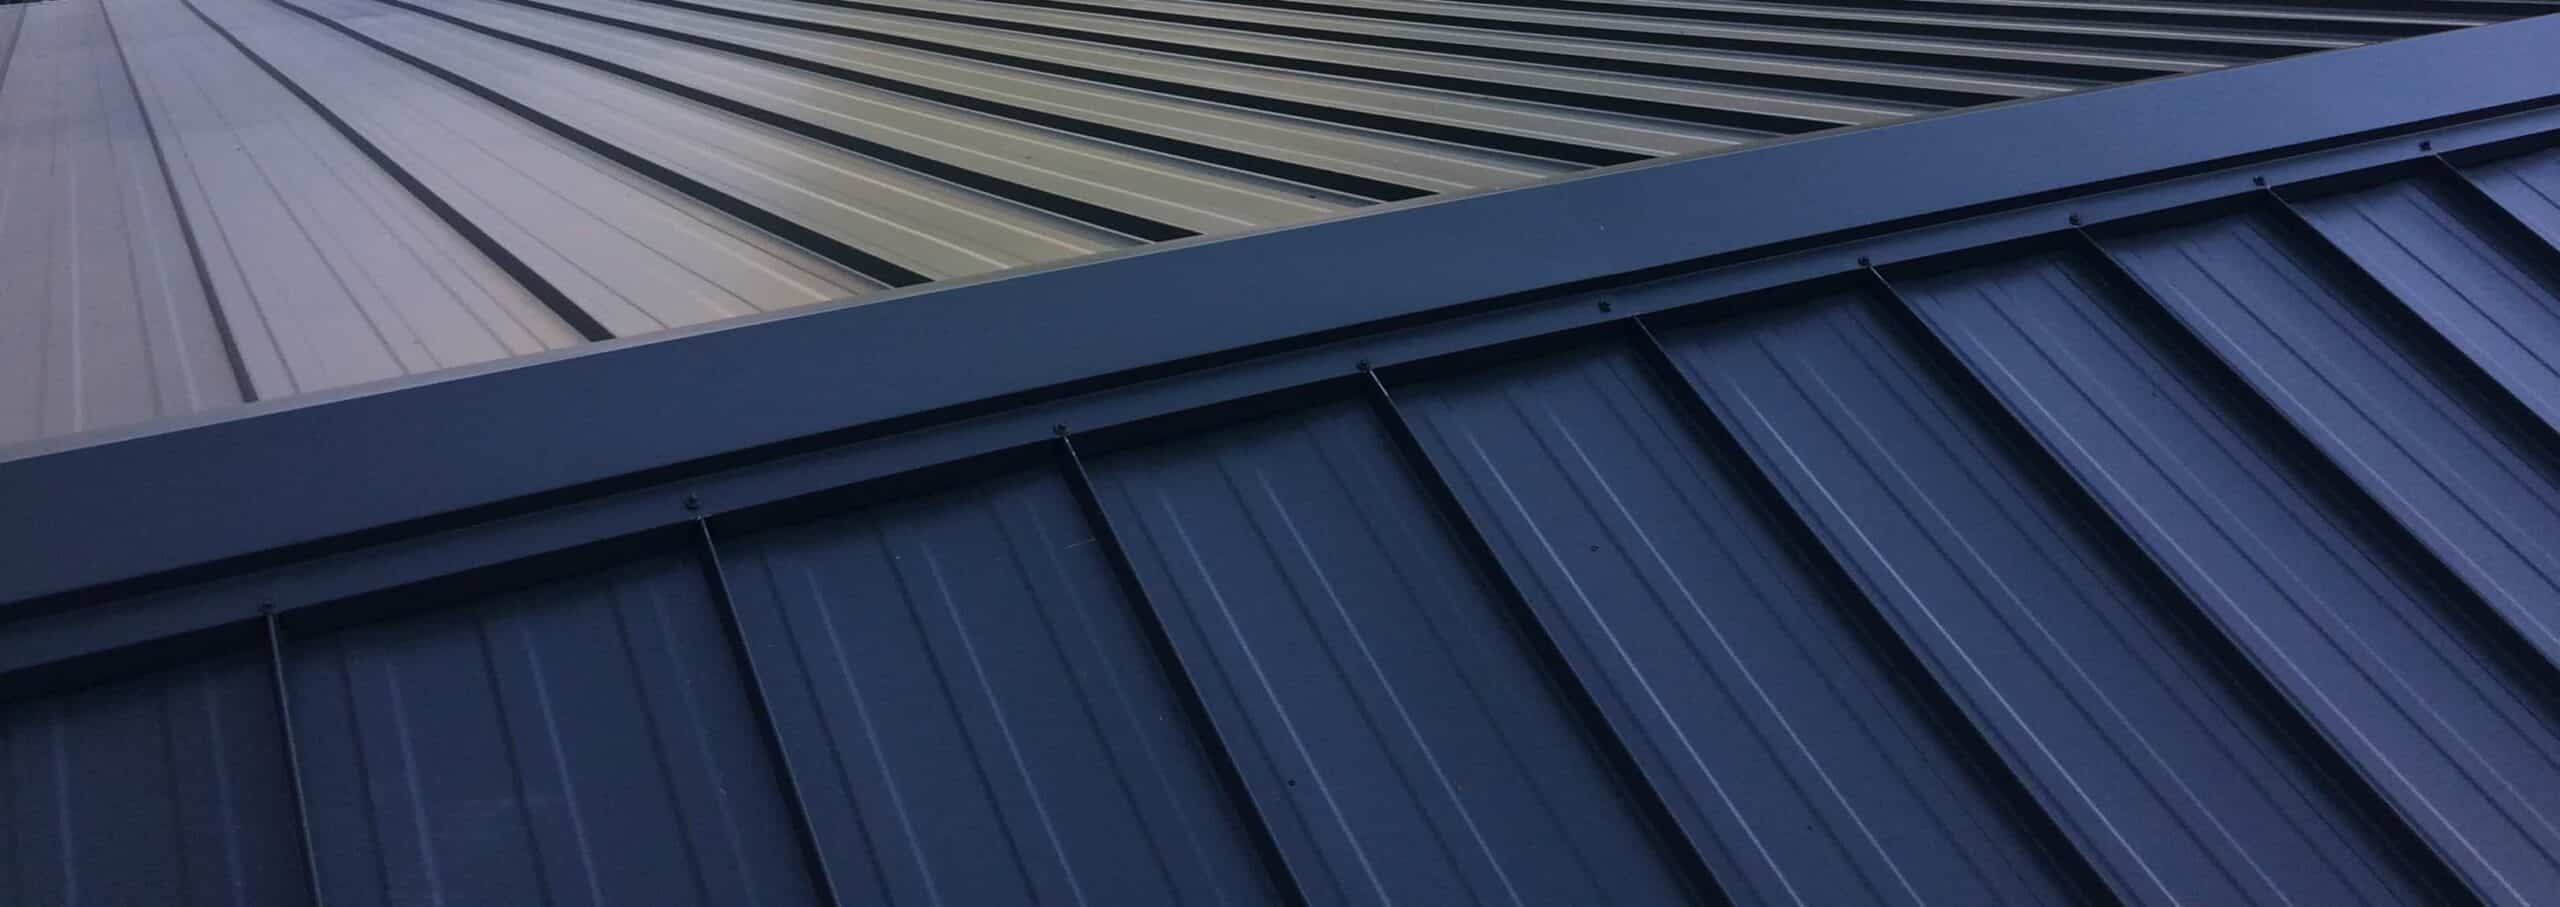 Valley Roofing has made metal roofing available to The Mid-Willamette Valley Of Oregon